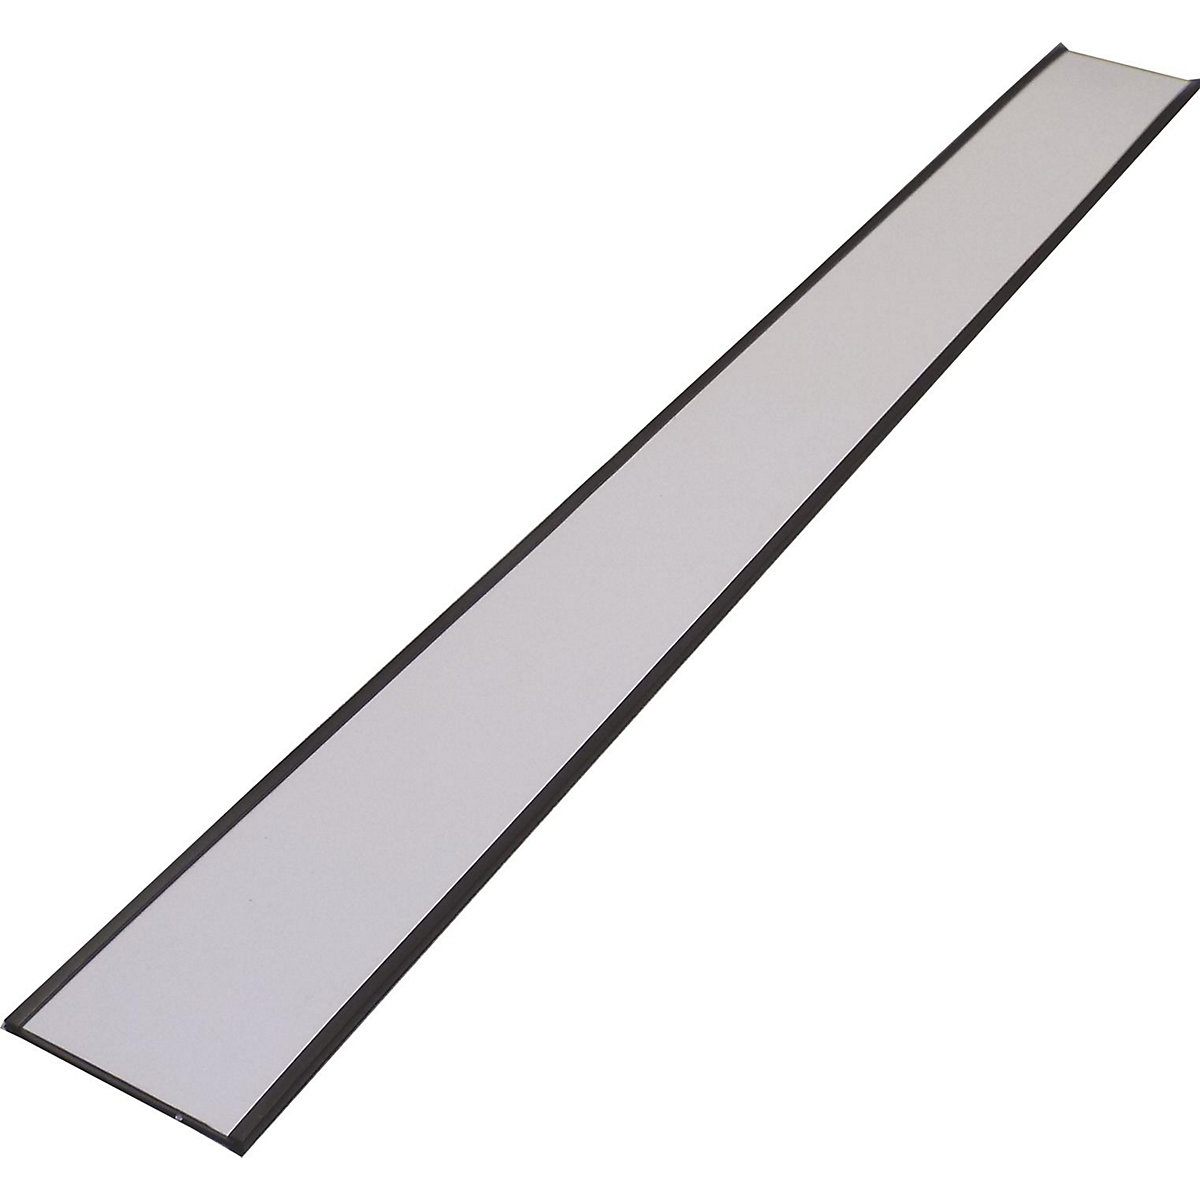 Label holder, magnetic, pack of 20, height 50 mm, length 500 mm-2